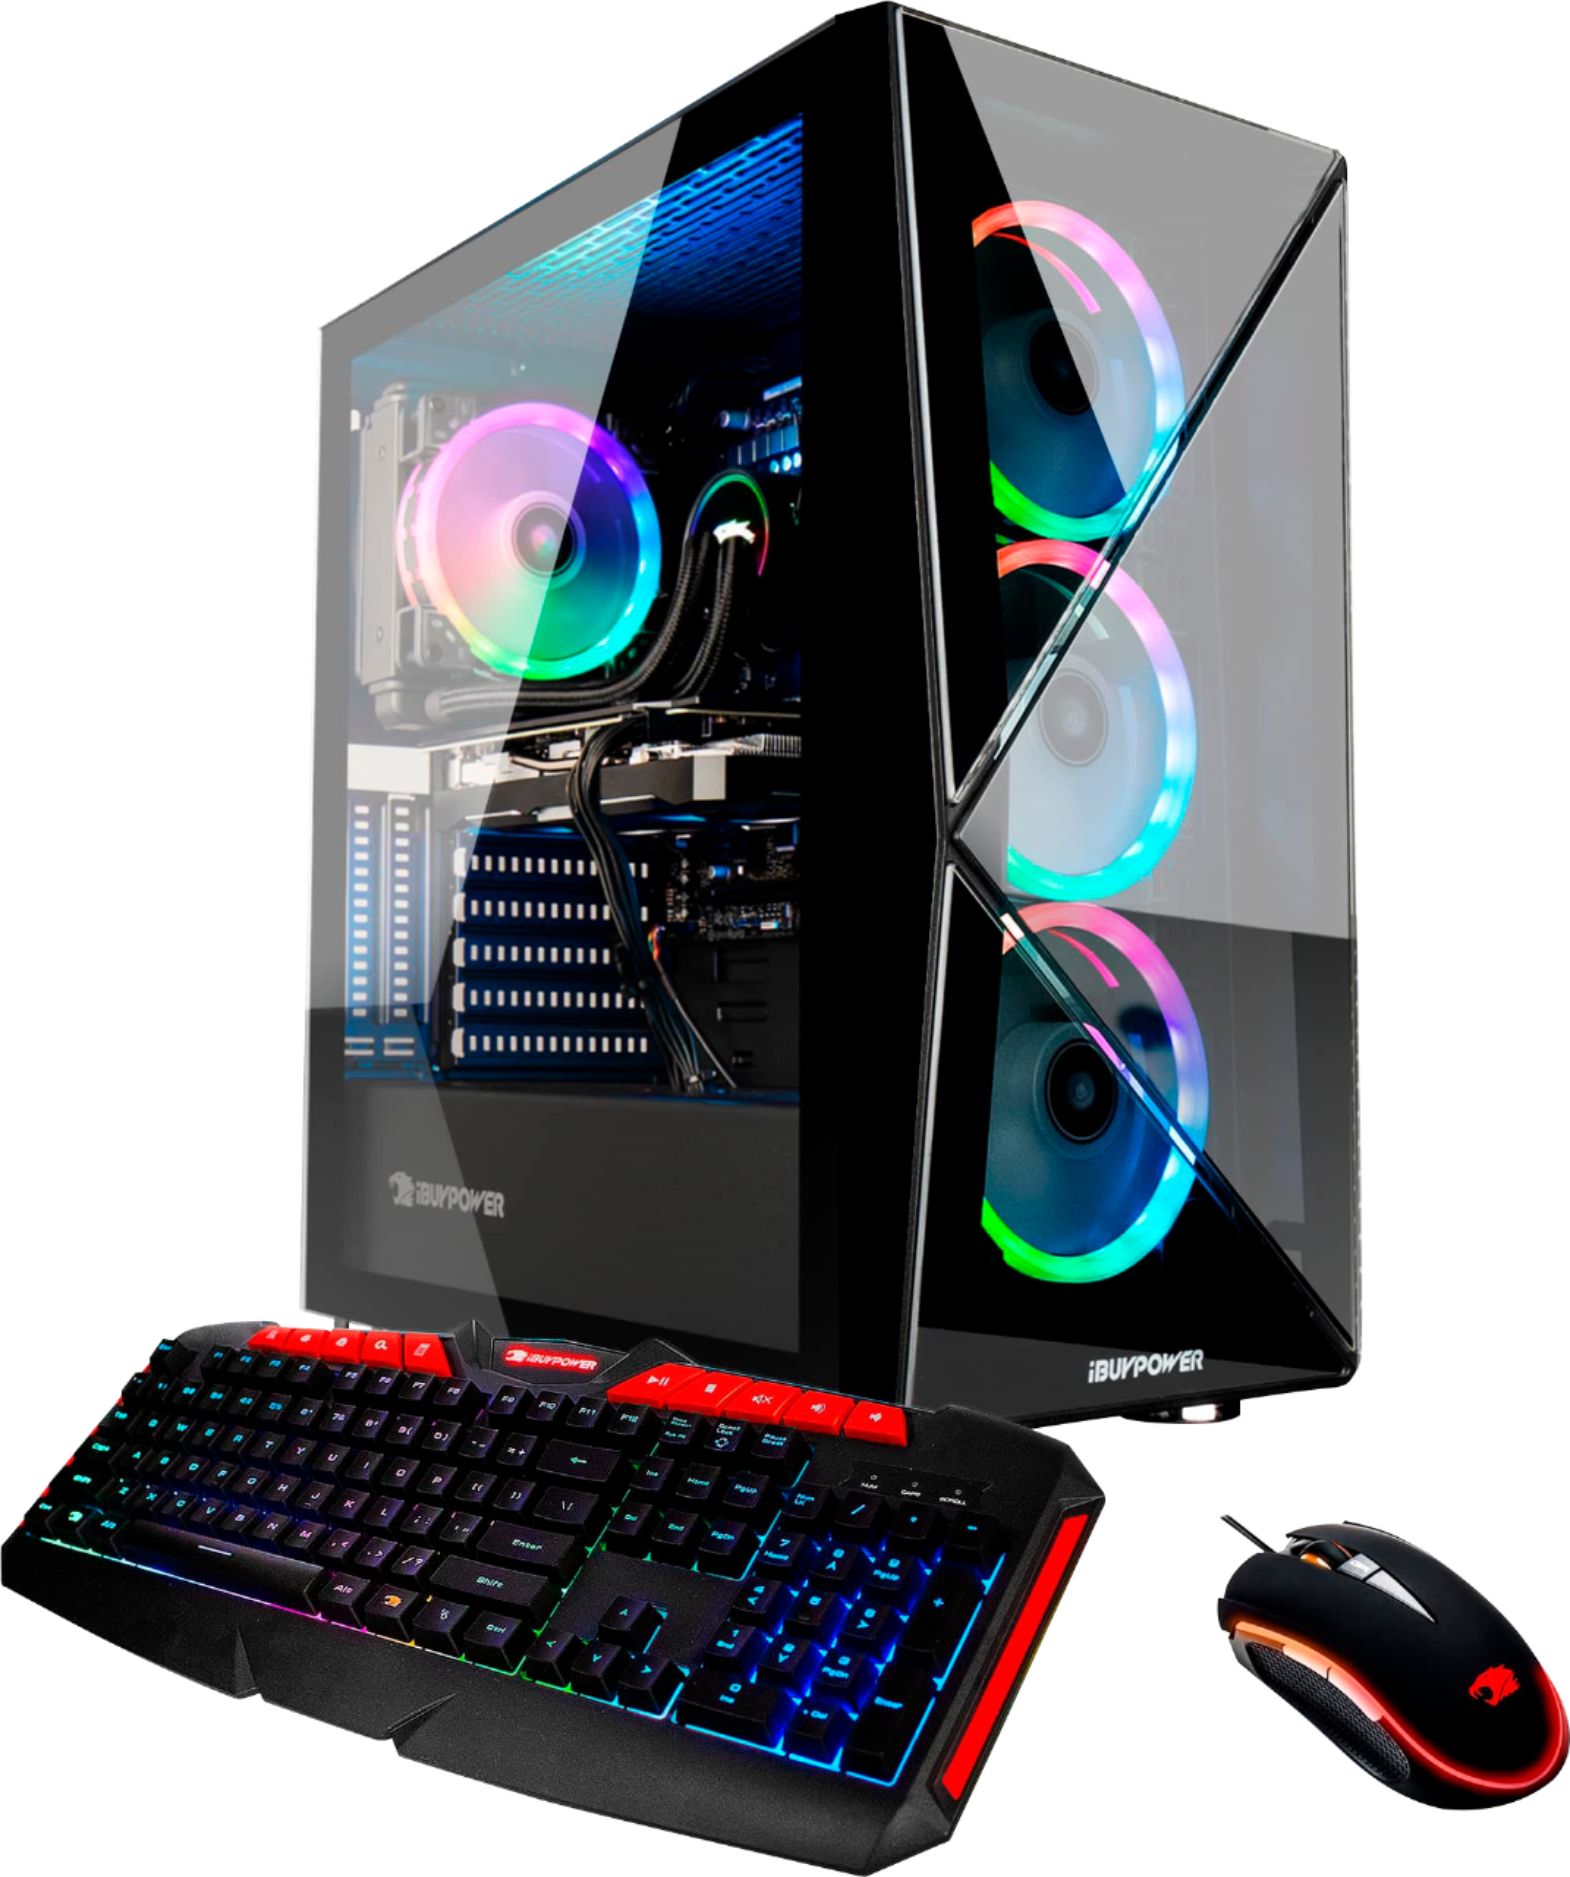 Simple Is The Ibuypower Gaming Pc Good in Living room